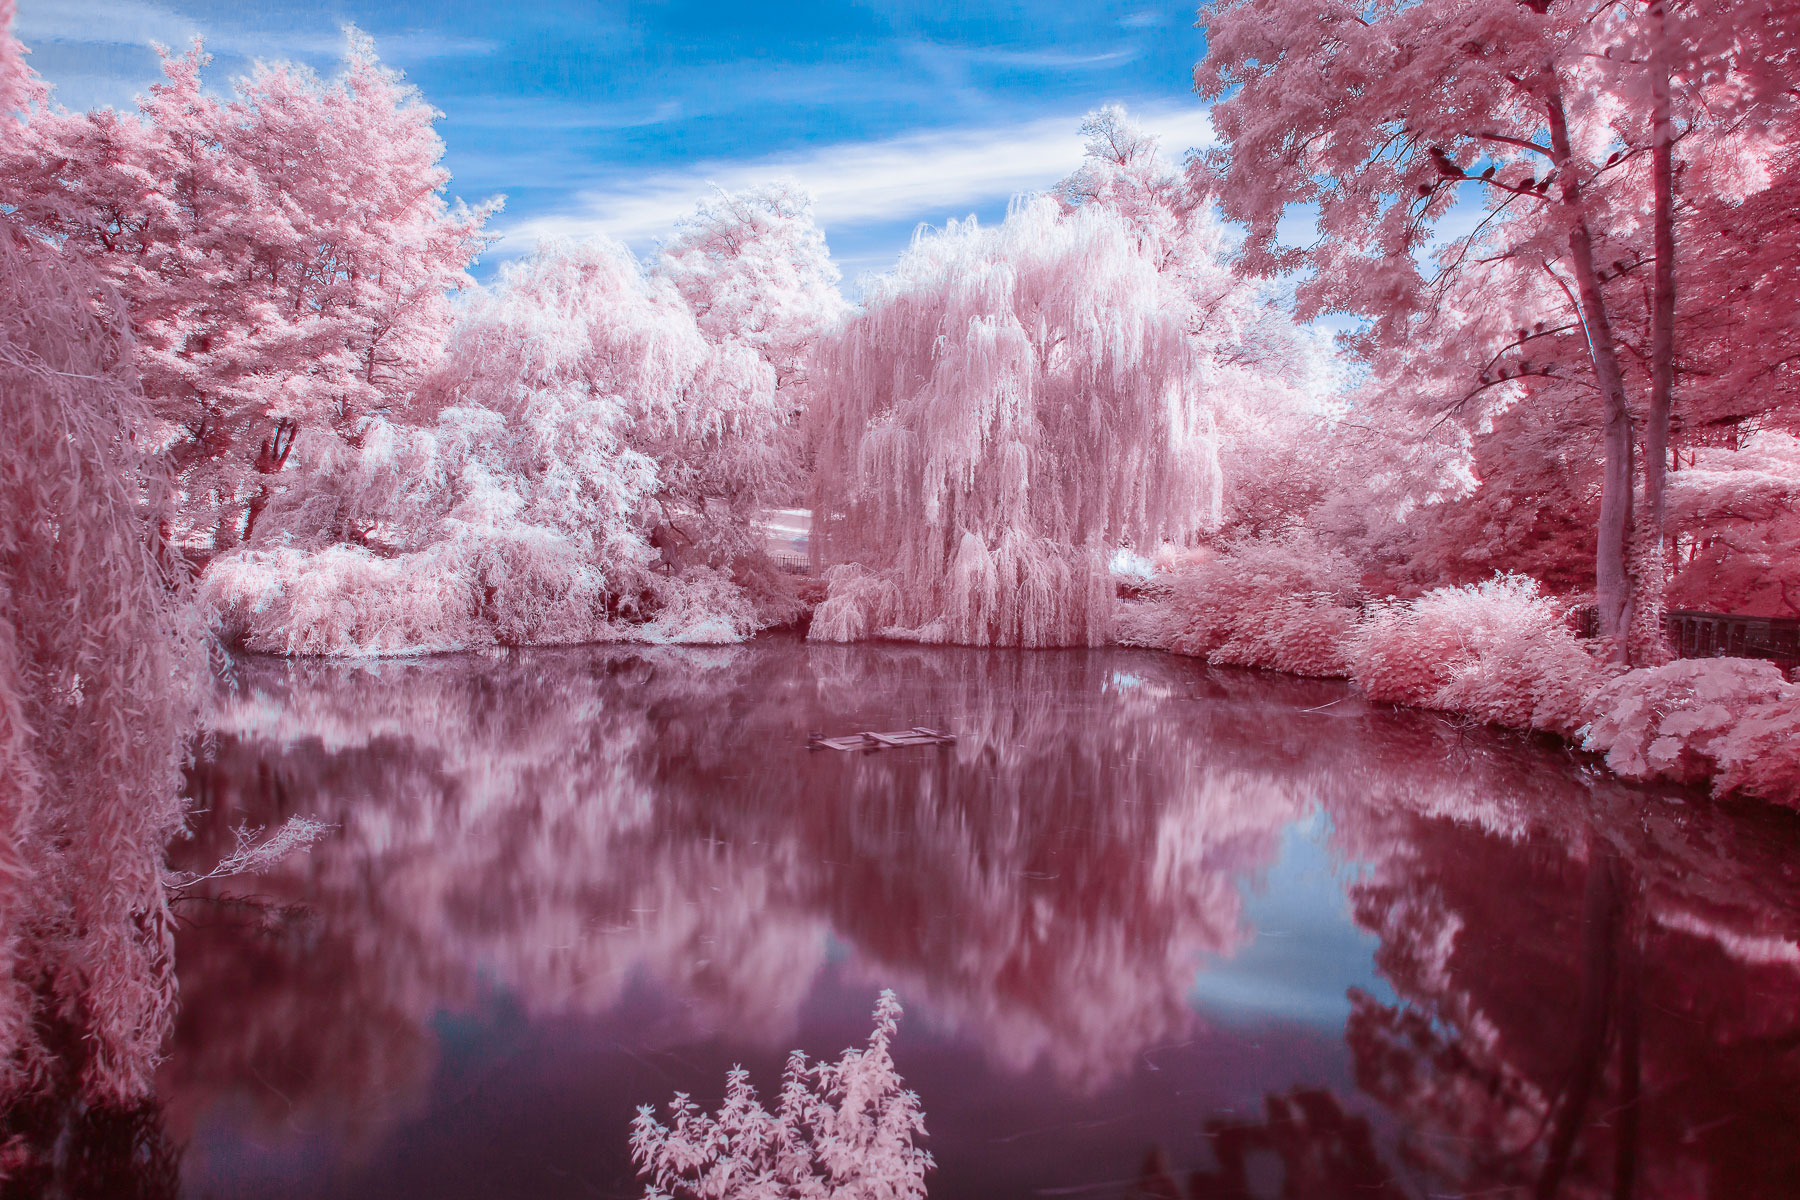 HOYA | Reviews - Infrared photography with the HOYA R72 filter